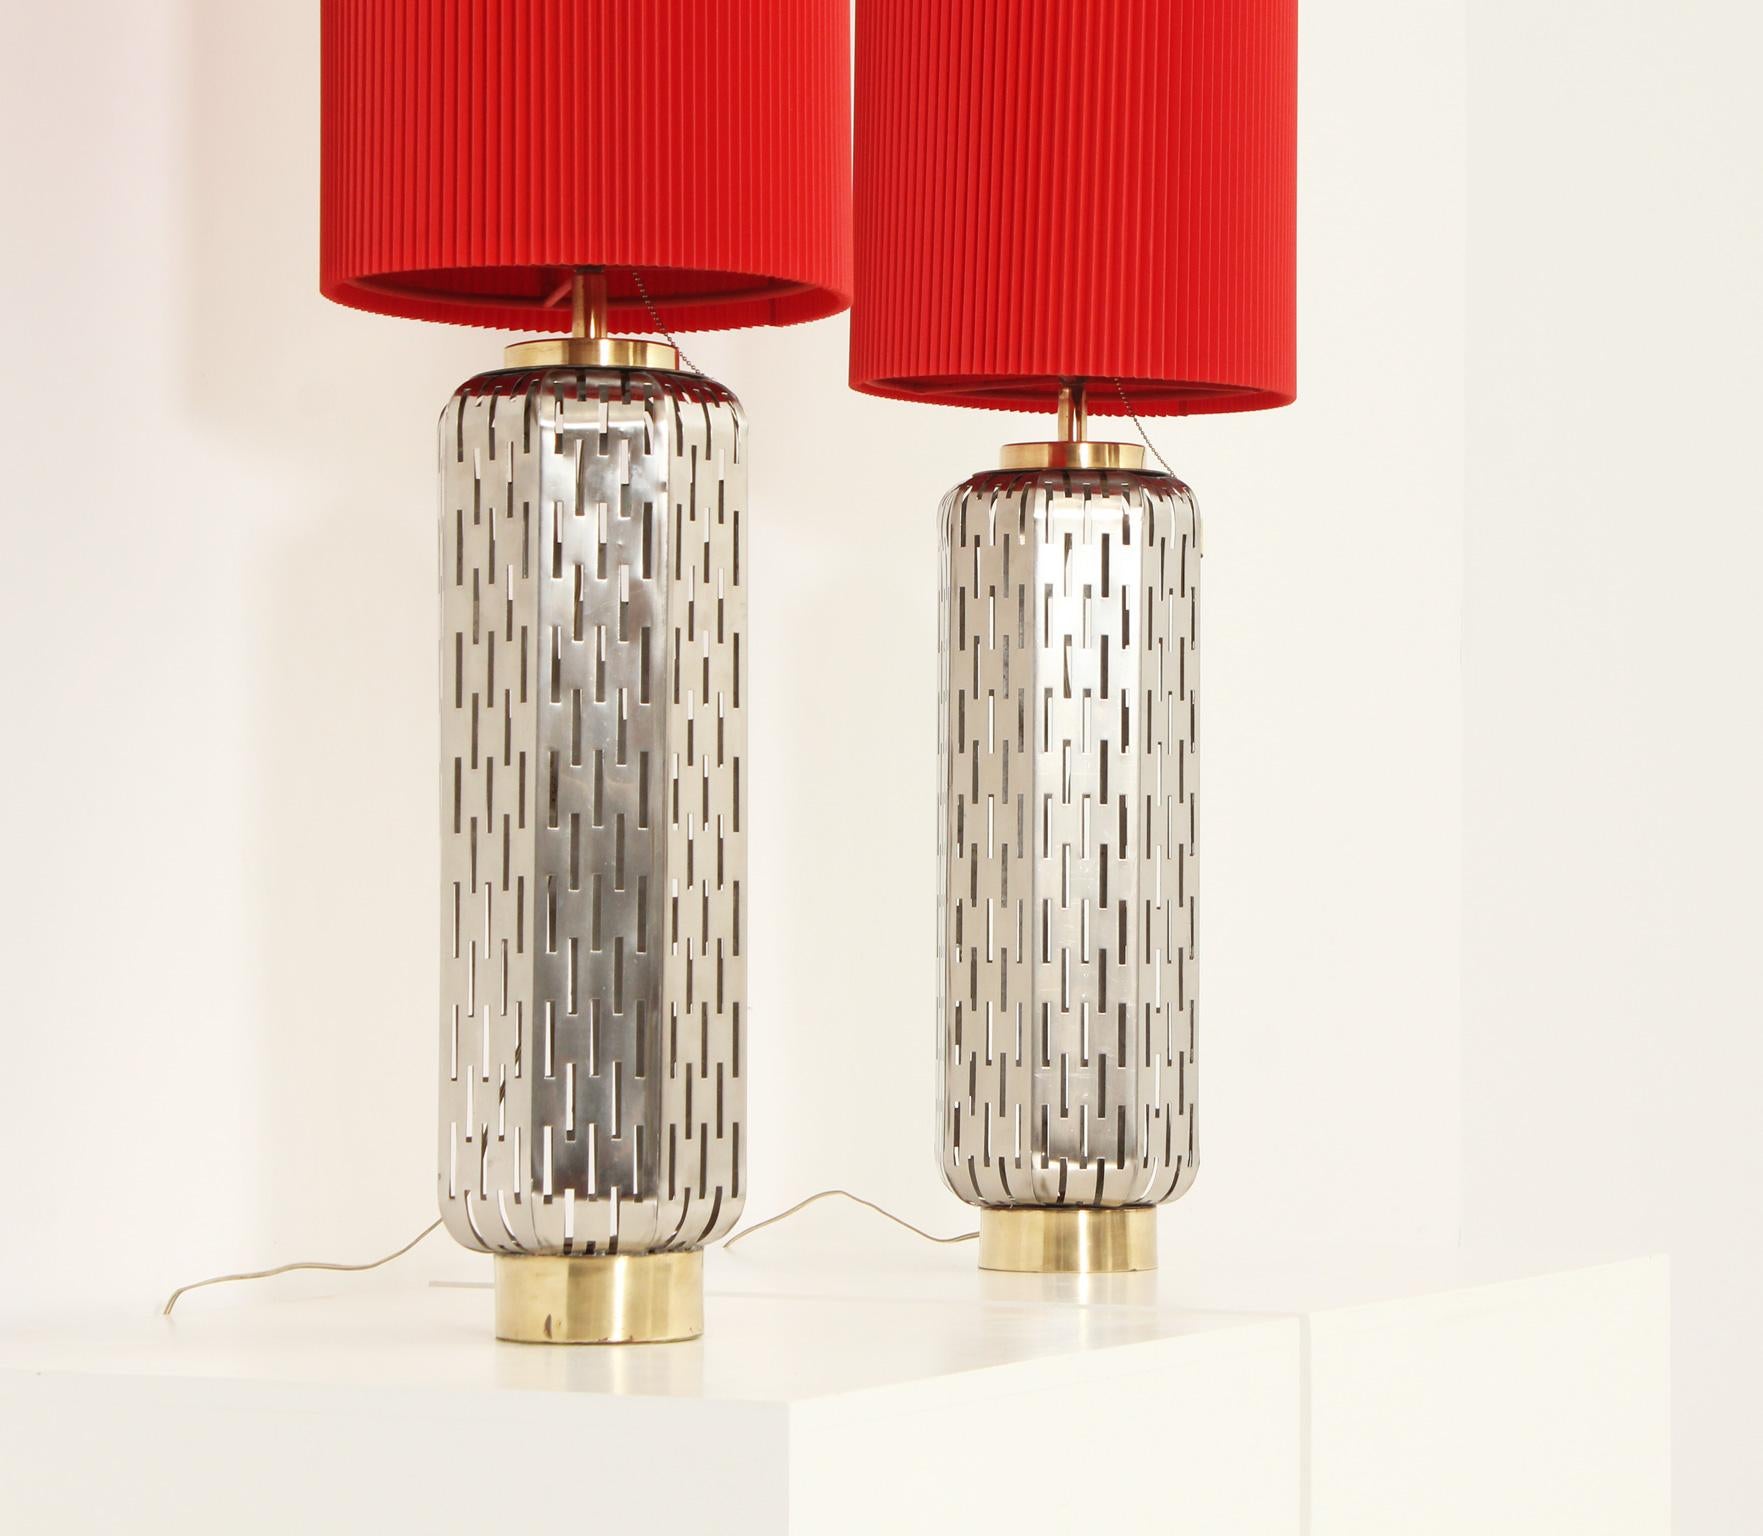 Pair of Large Table Lamps in Perforated Steel, Spain, 1960's For Sale 1